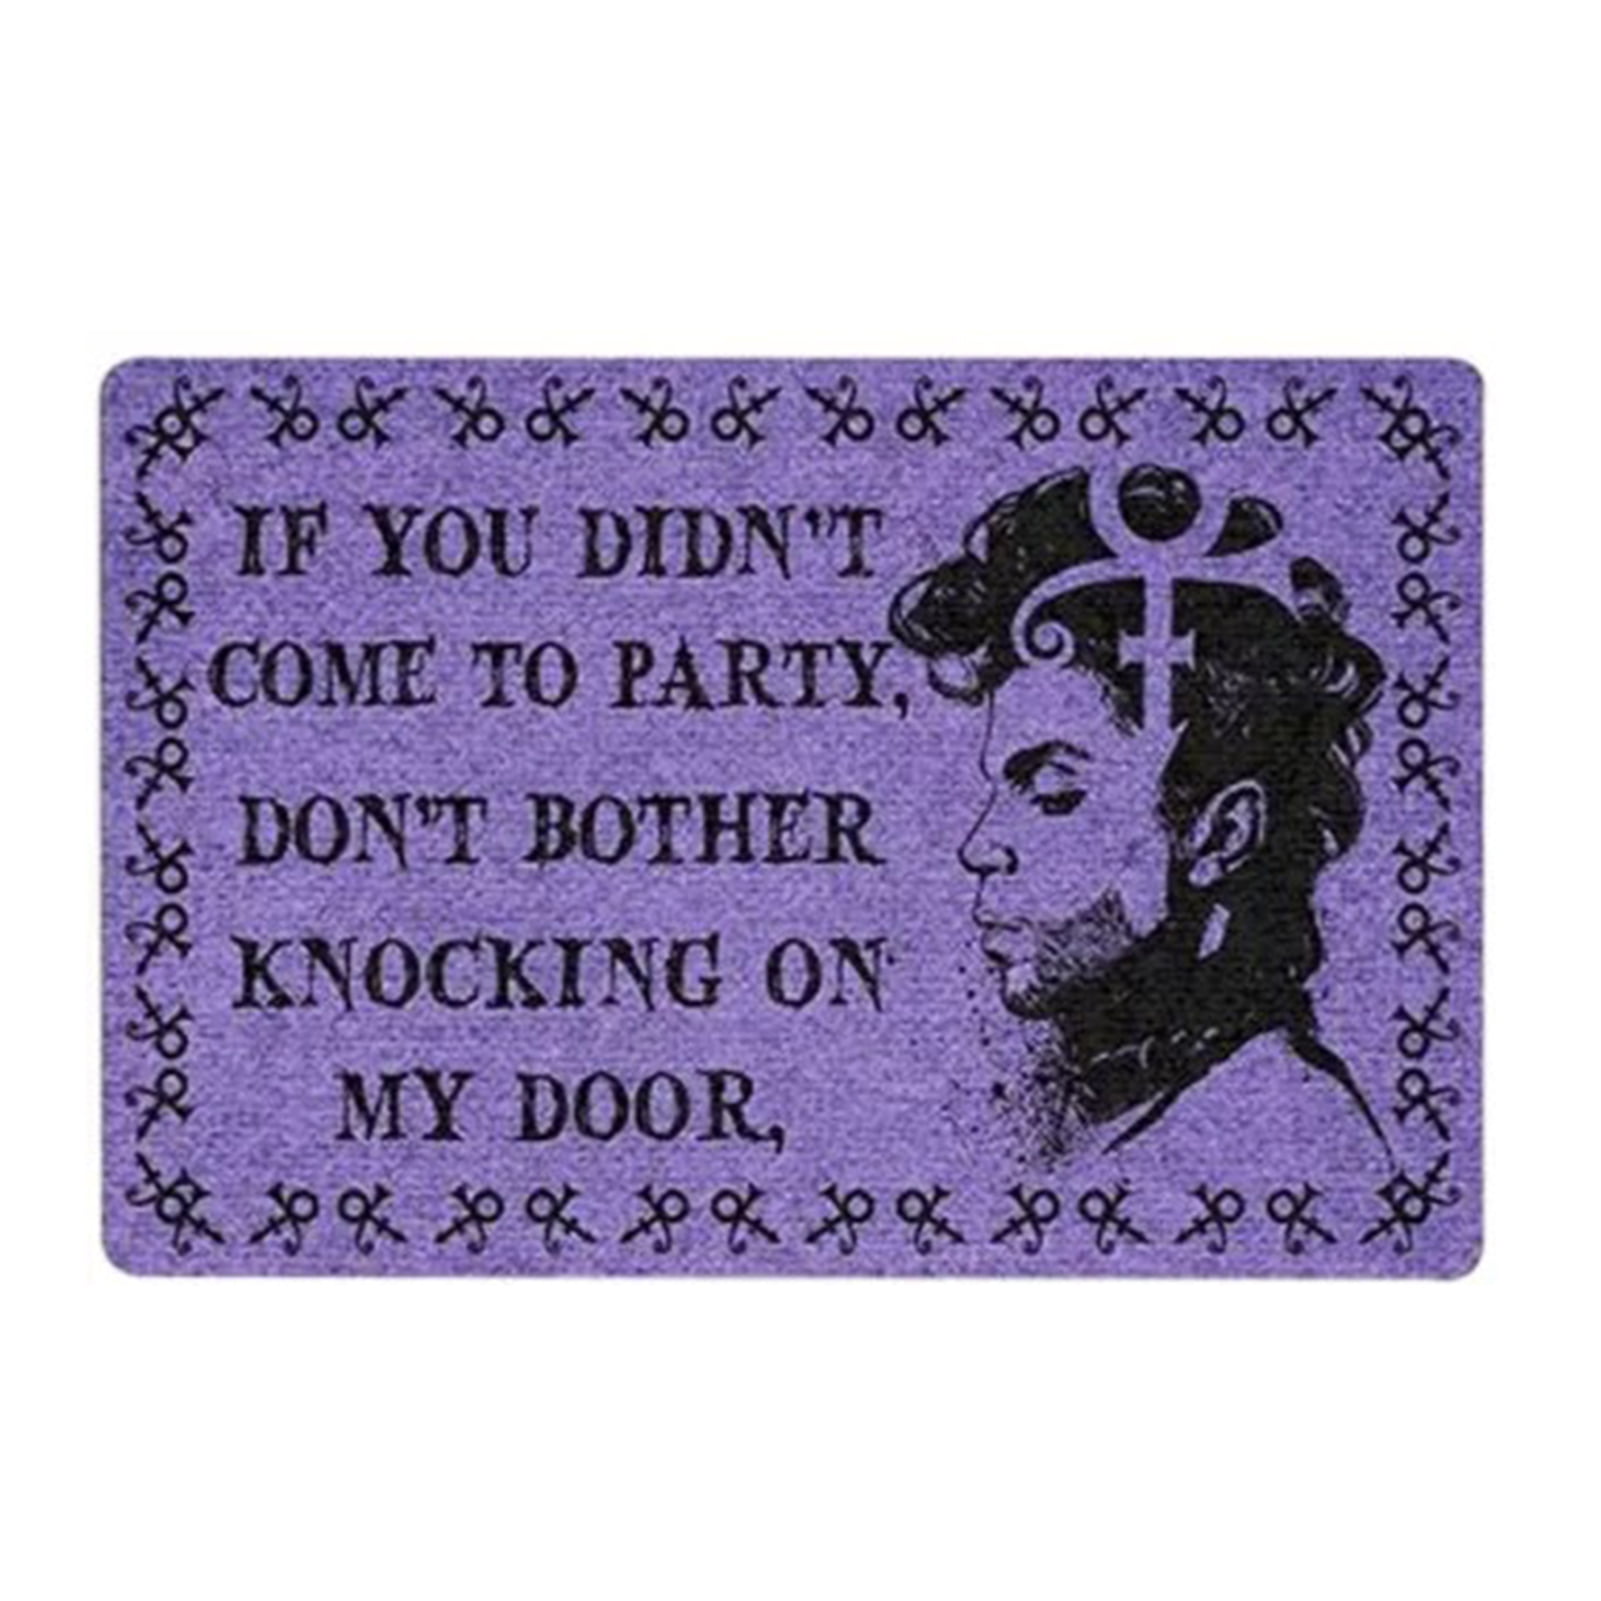 2021 Funny Doormat-If You Didn't Come to Party Don't Bother Knocking On My Door